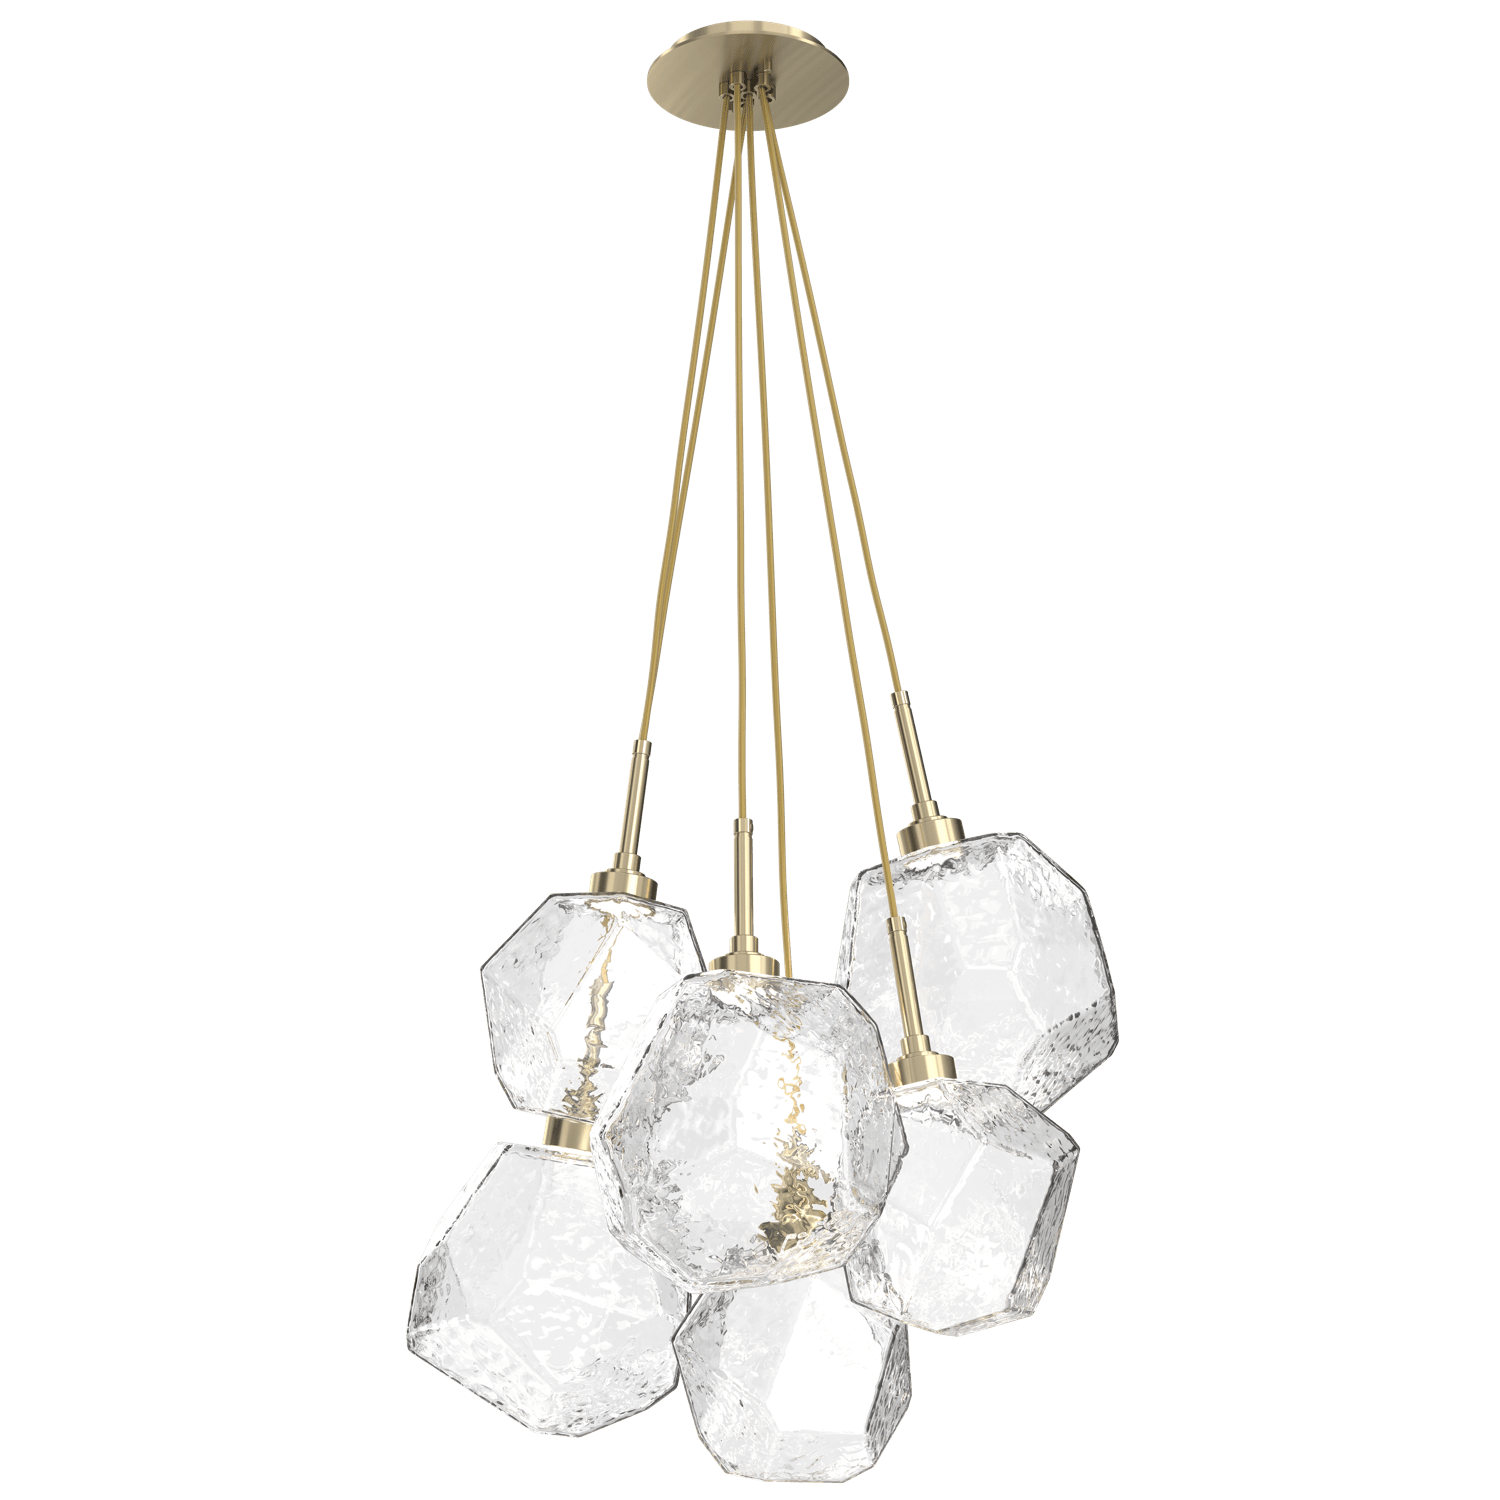 CHB0039-0F-HB-C-Hammerton-Studio-Gem-6-light-cluster-pendant-light-with-heritage-brass-finish-and-clear-blown-glass-shades-and-LED-lamping